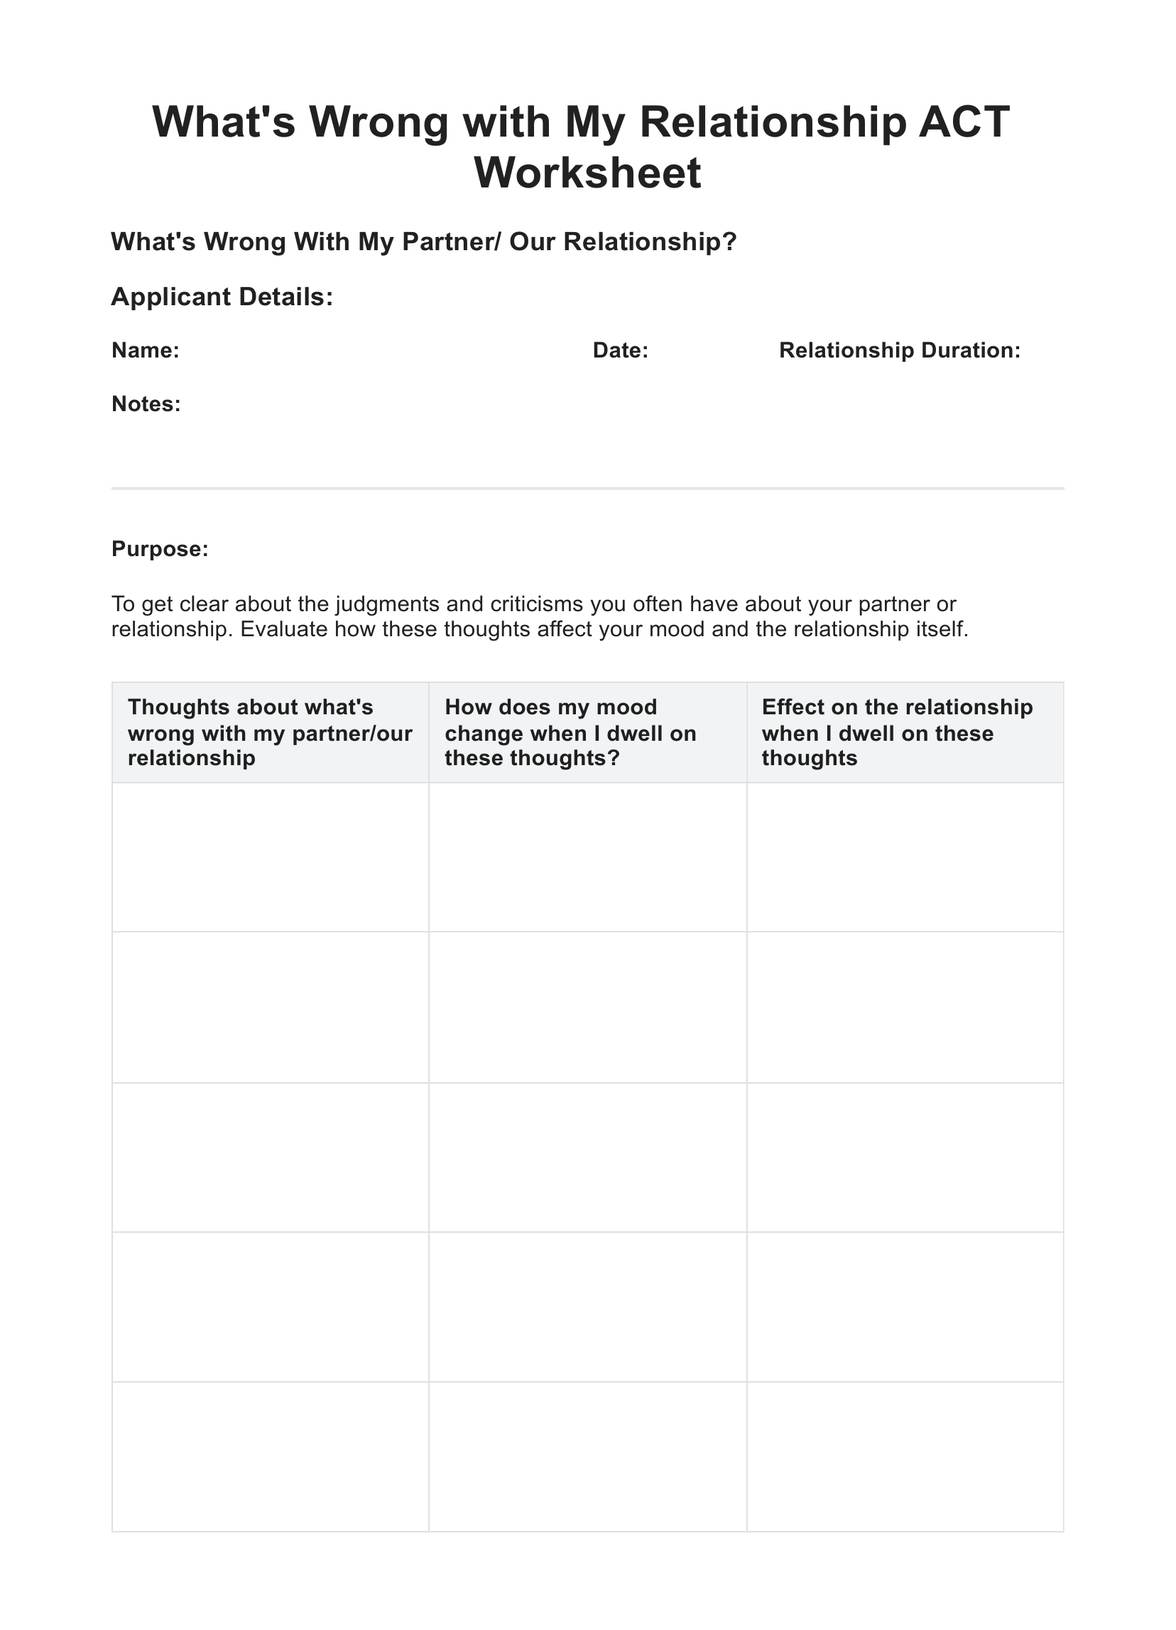 What's Wrong with My Relationship ACT Worksheet PDF Example